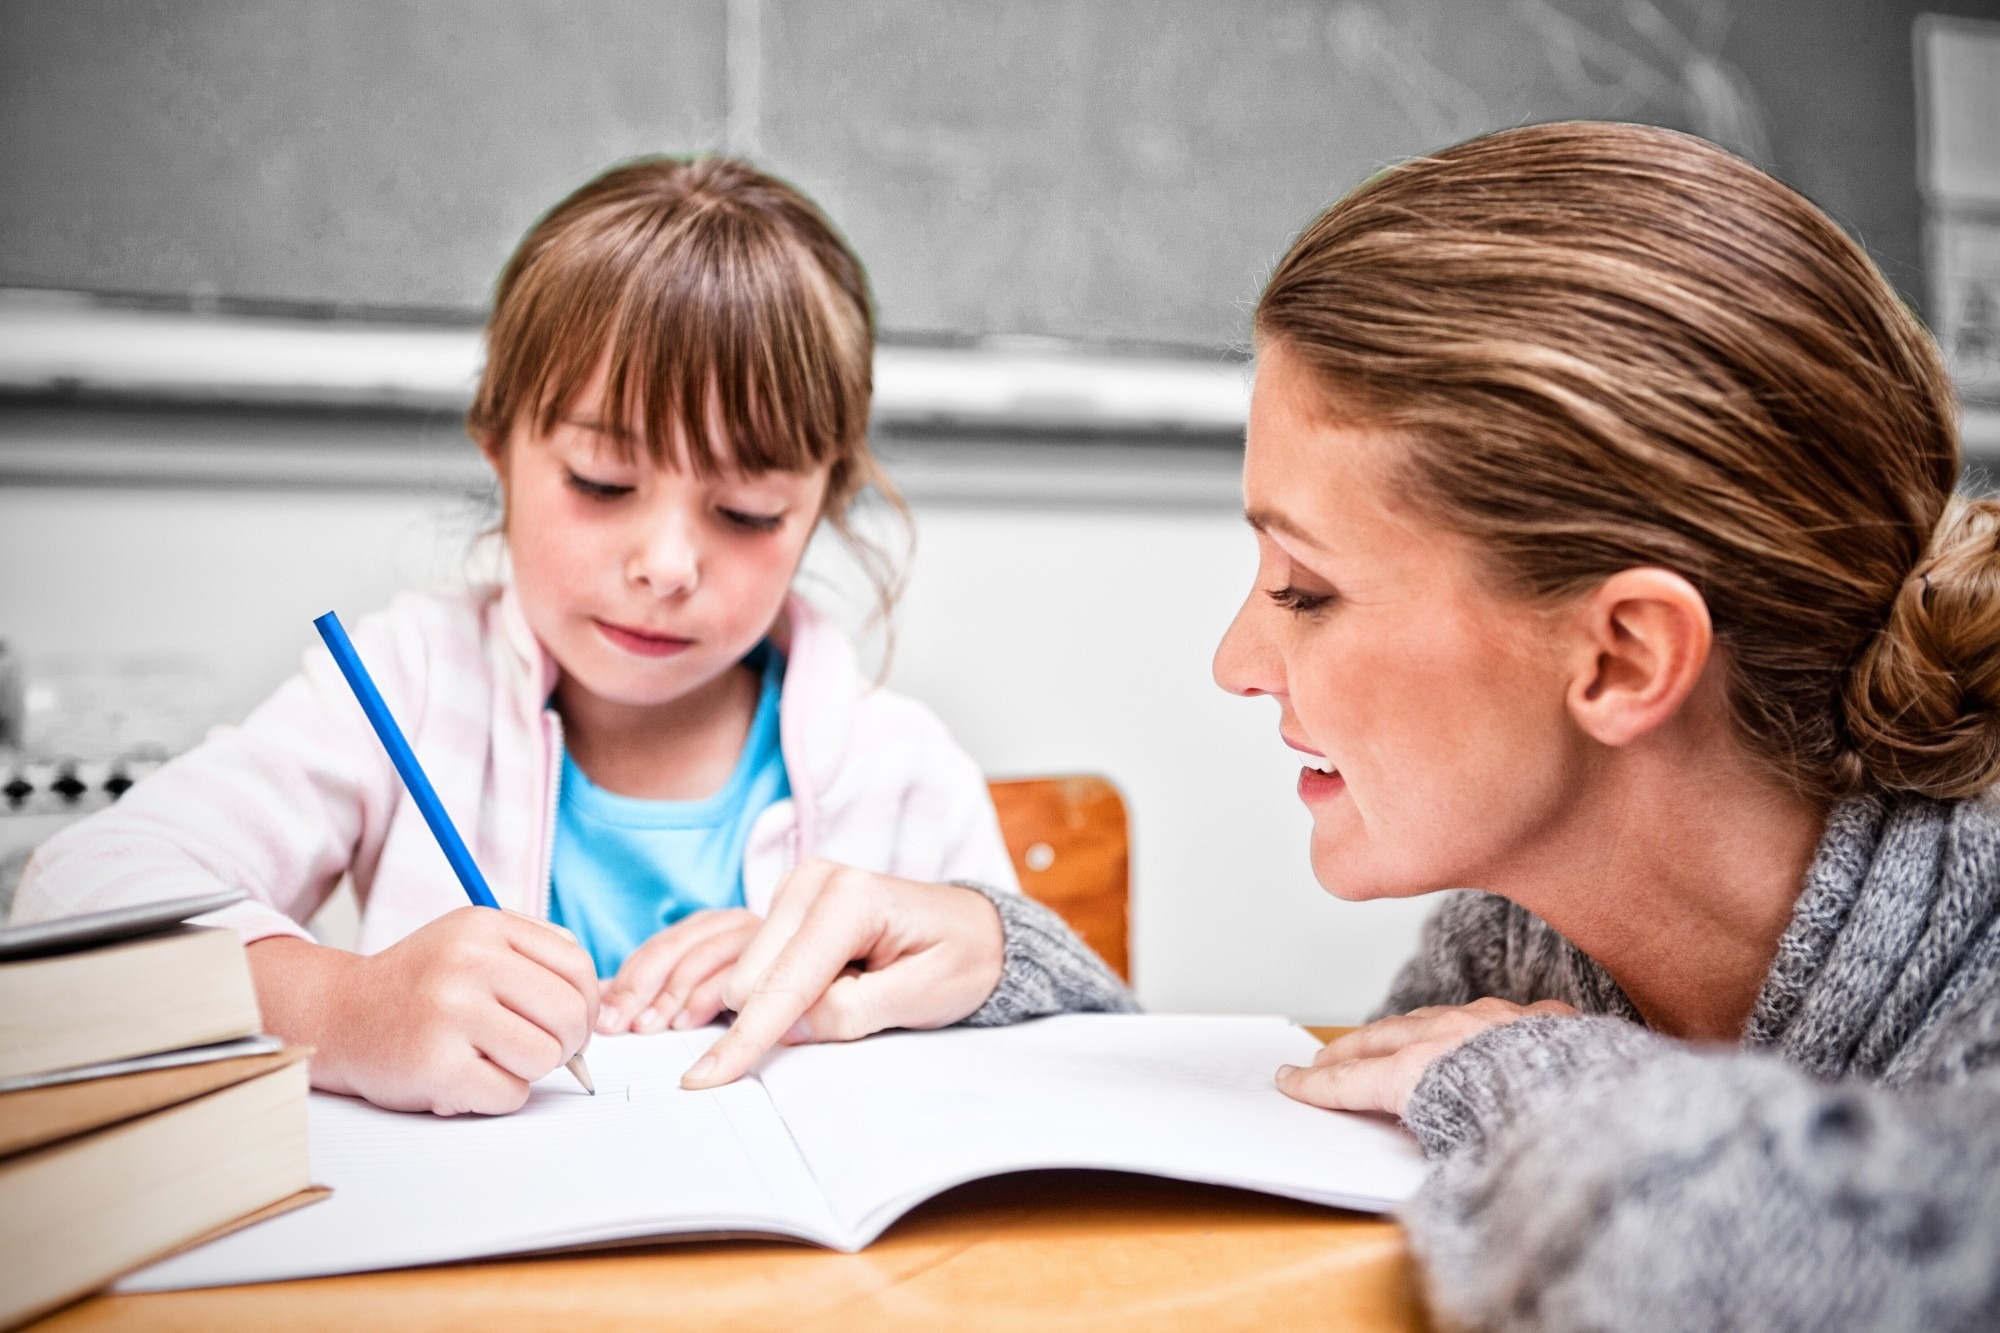 4 Key Things You Should Know Before Becoming a Teacher